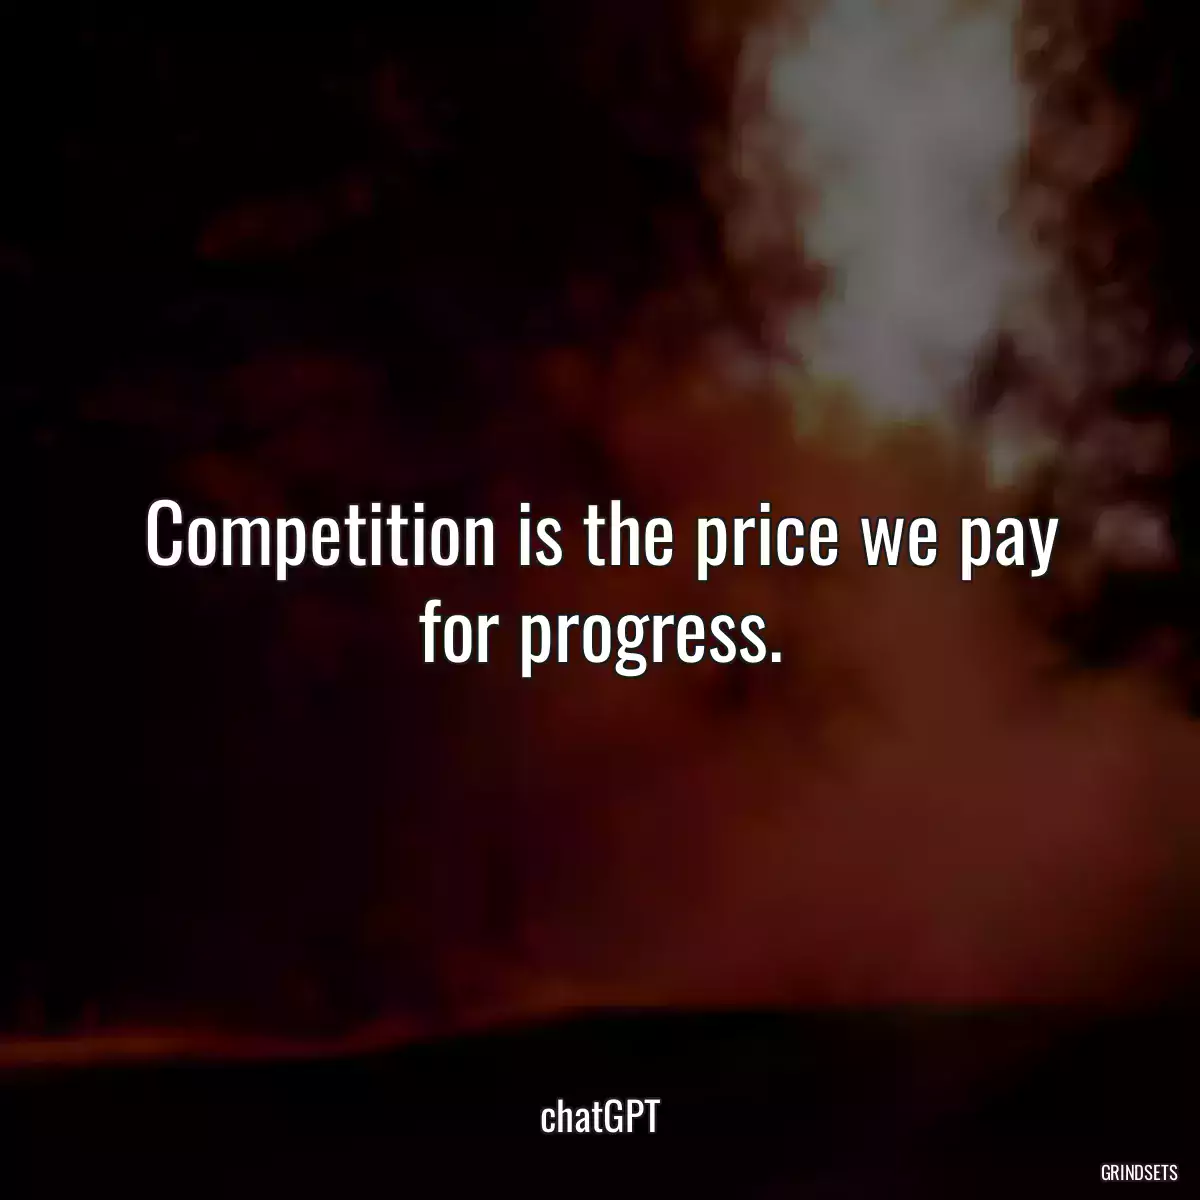 Competition is the price we pay for progress.